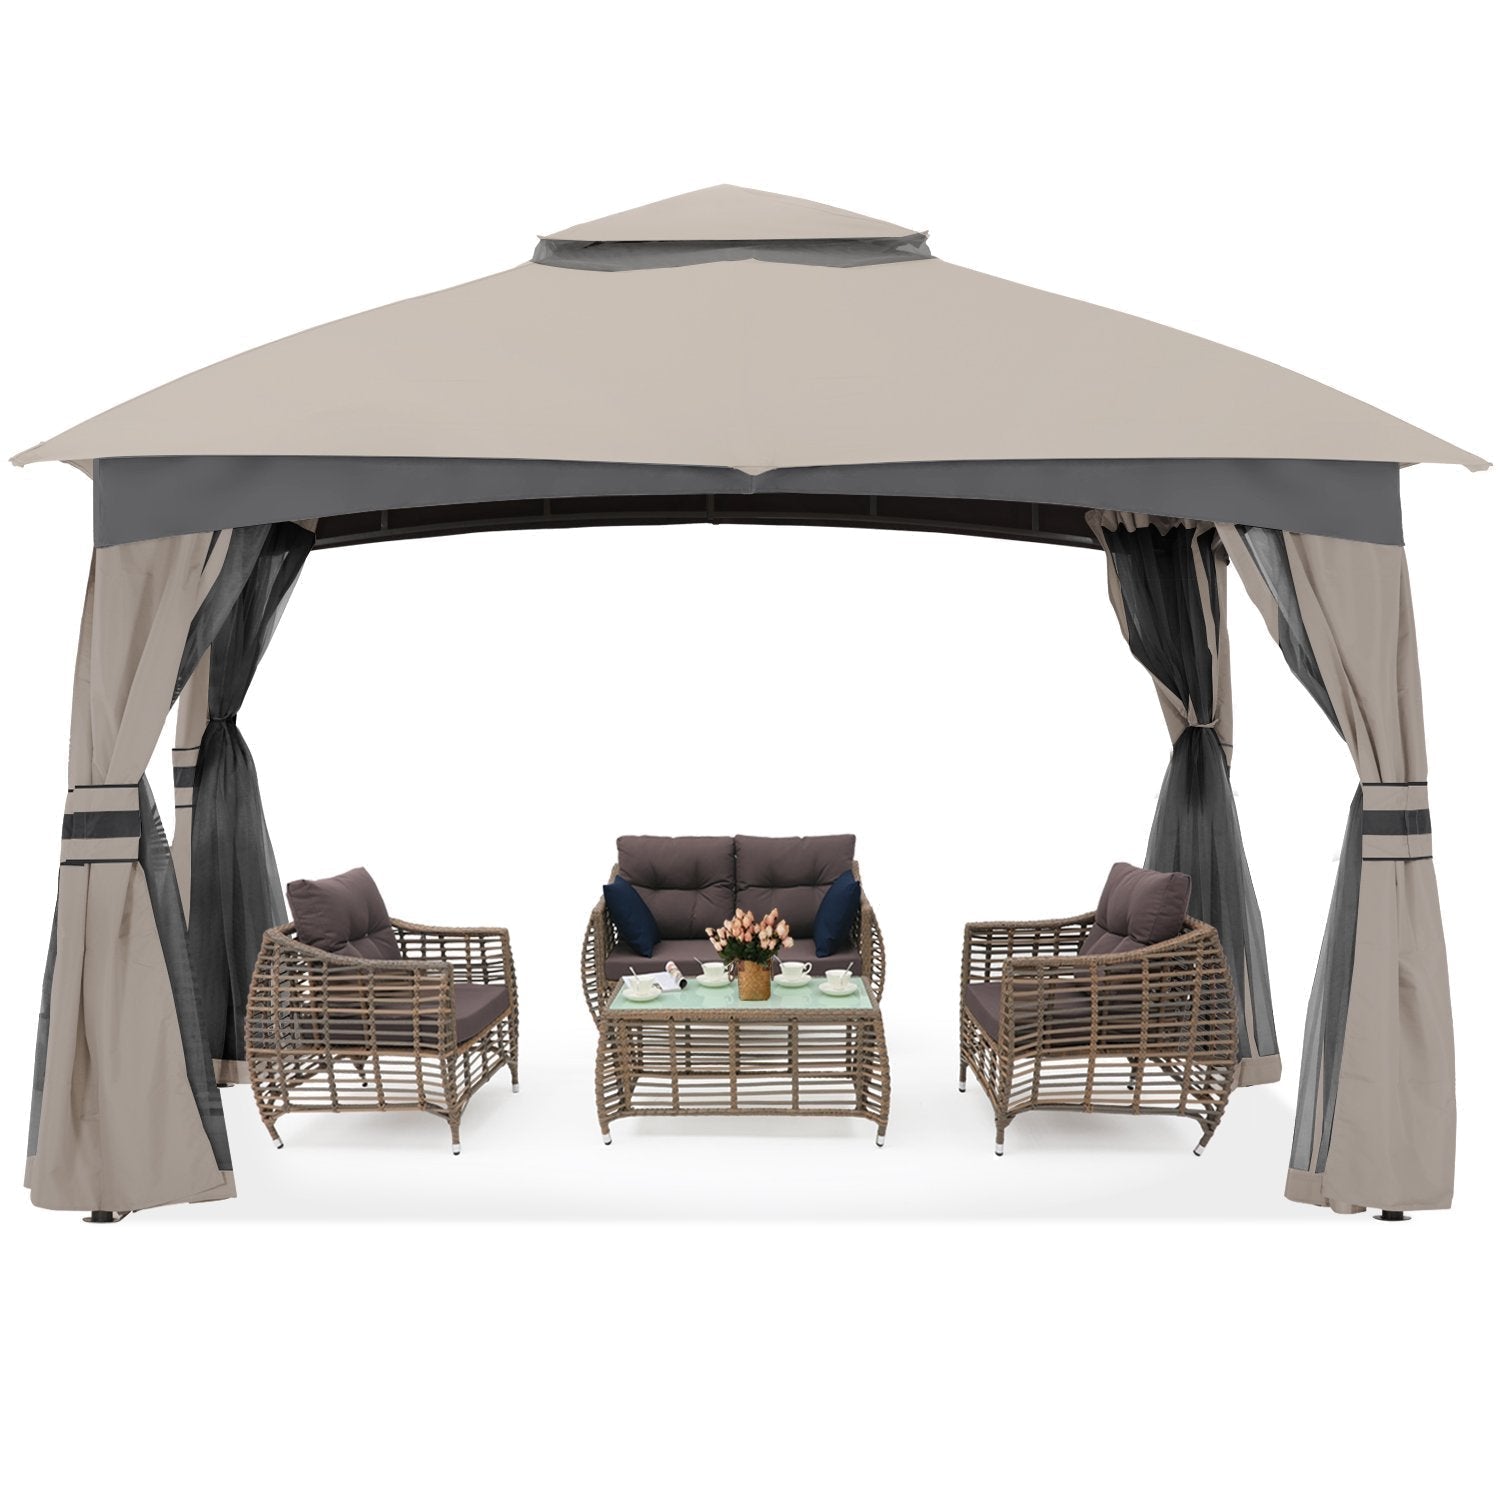 Patio Garden Gazebo with Mosquito Netting+Double Soft-top - ABC-CANOPY